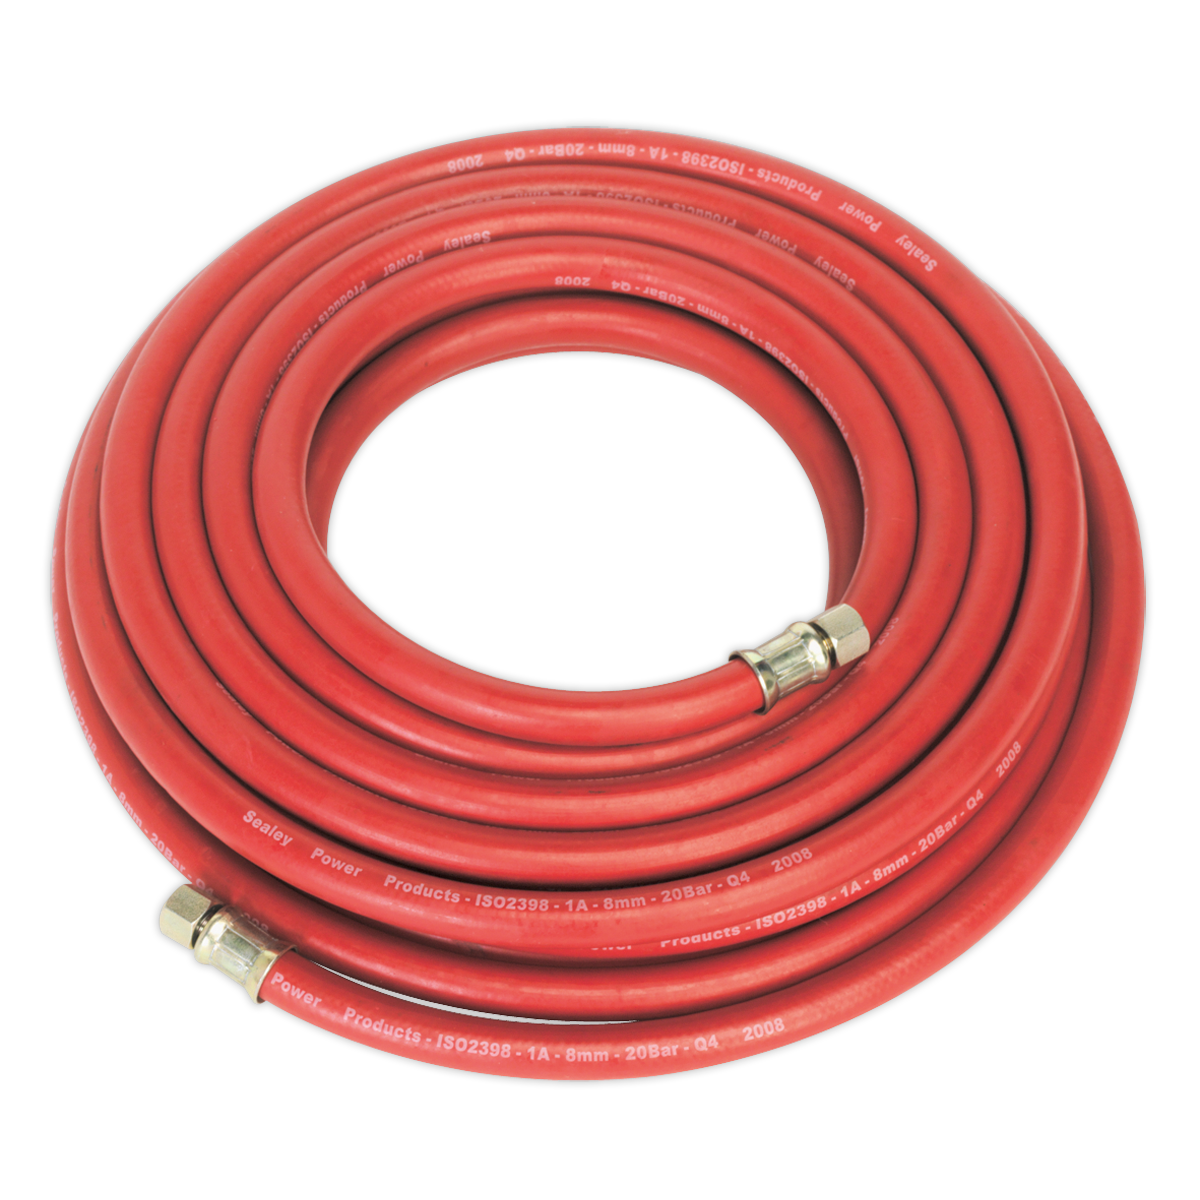 Sealey 10m x Ø8mm Air Hose with 1/4"BSP Unions AHC10